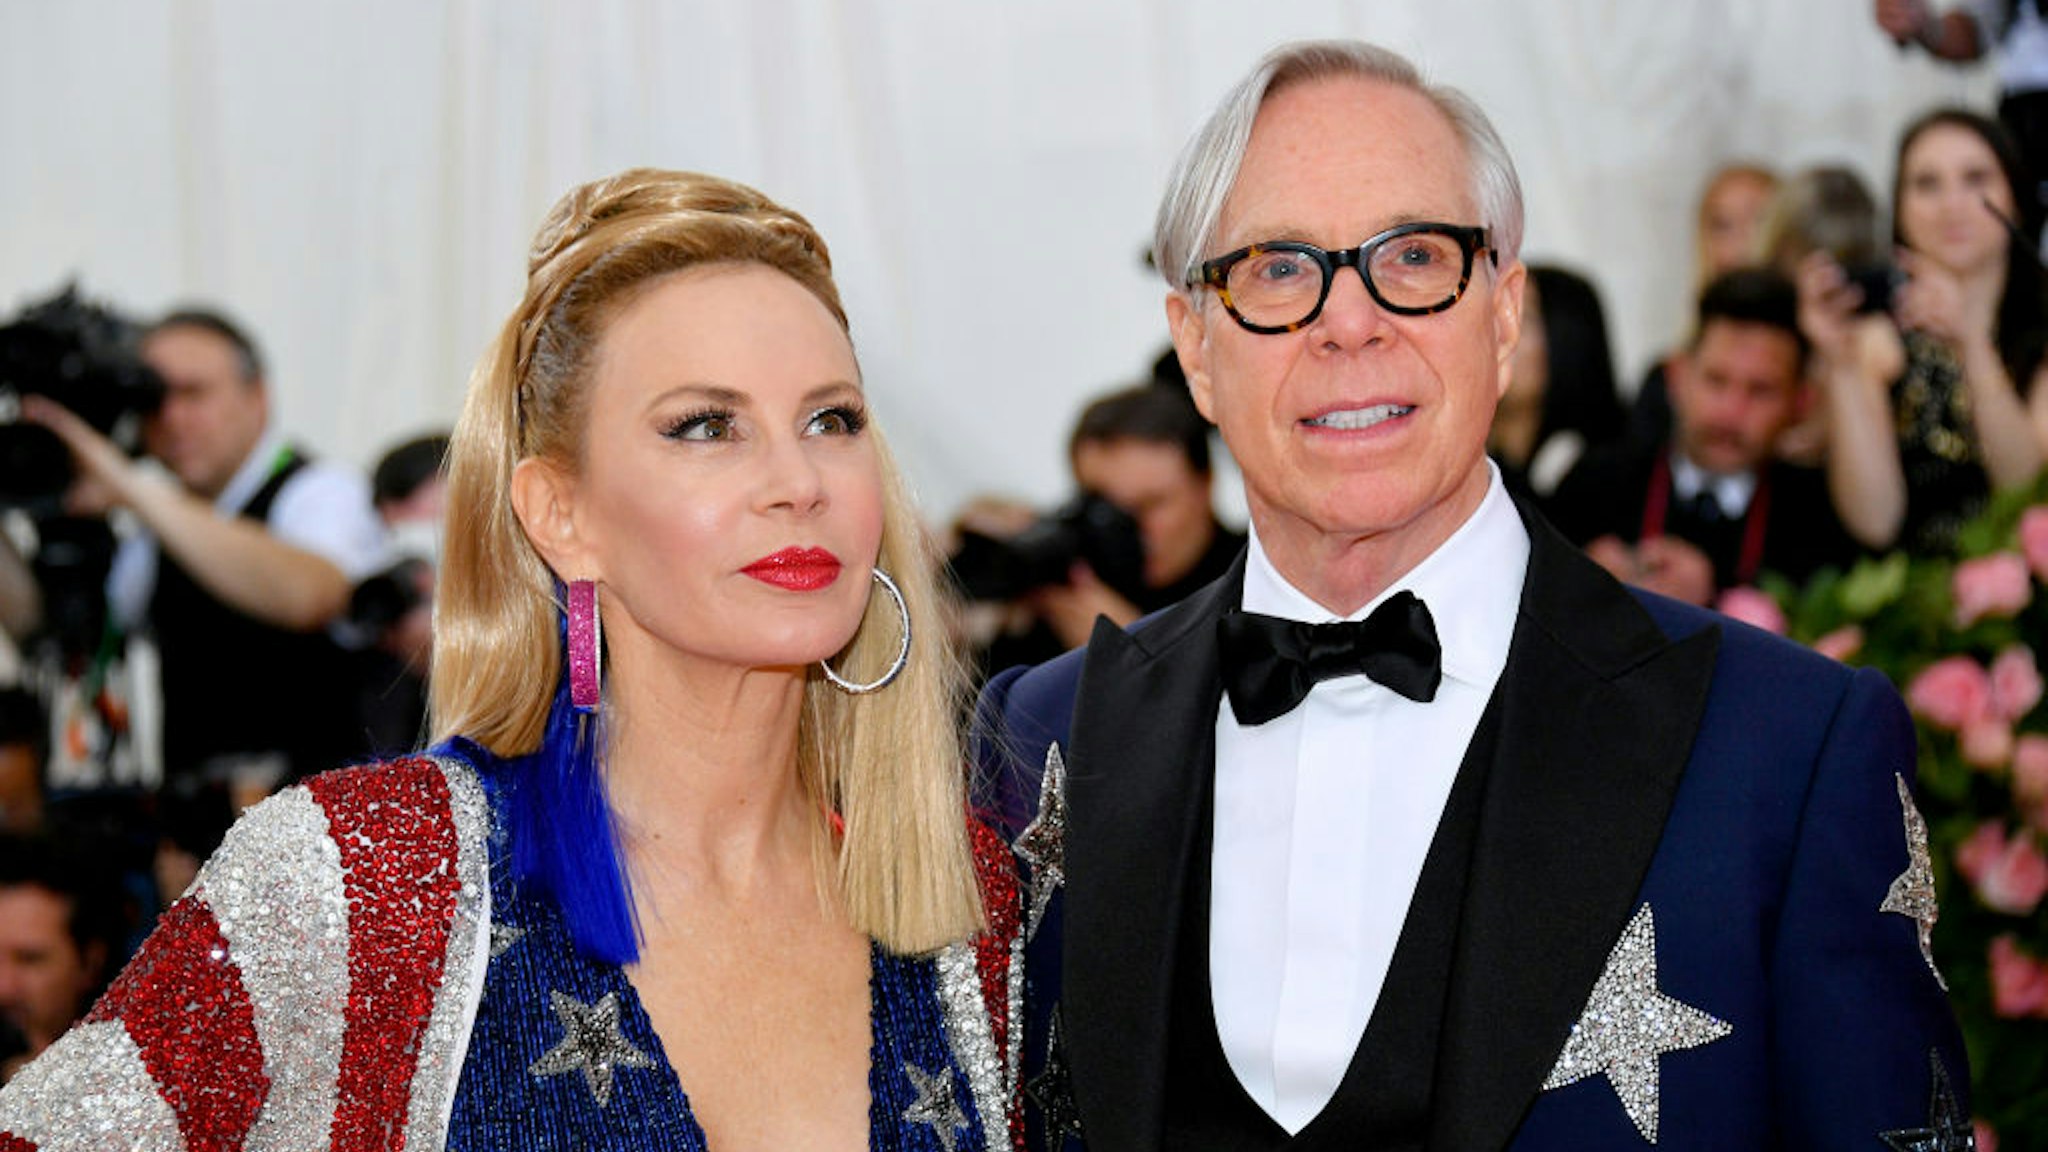 Tommy Hilfiger and Dee Hilfiger attend The 2019 Met Gala Celebrating Camp: Notes on Fashion at Metropolitan Museum of Art on May 06, 2019 in New York City.